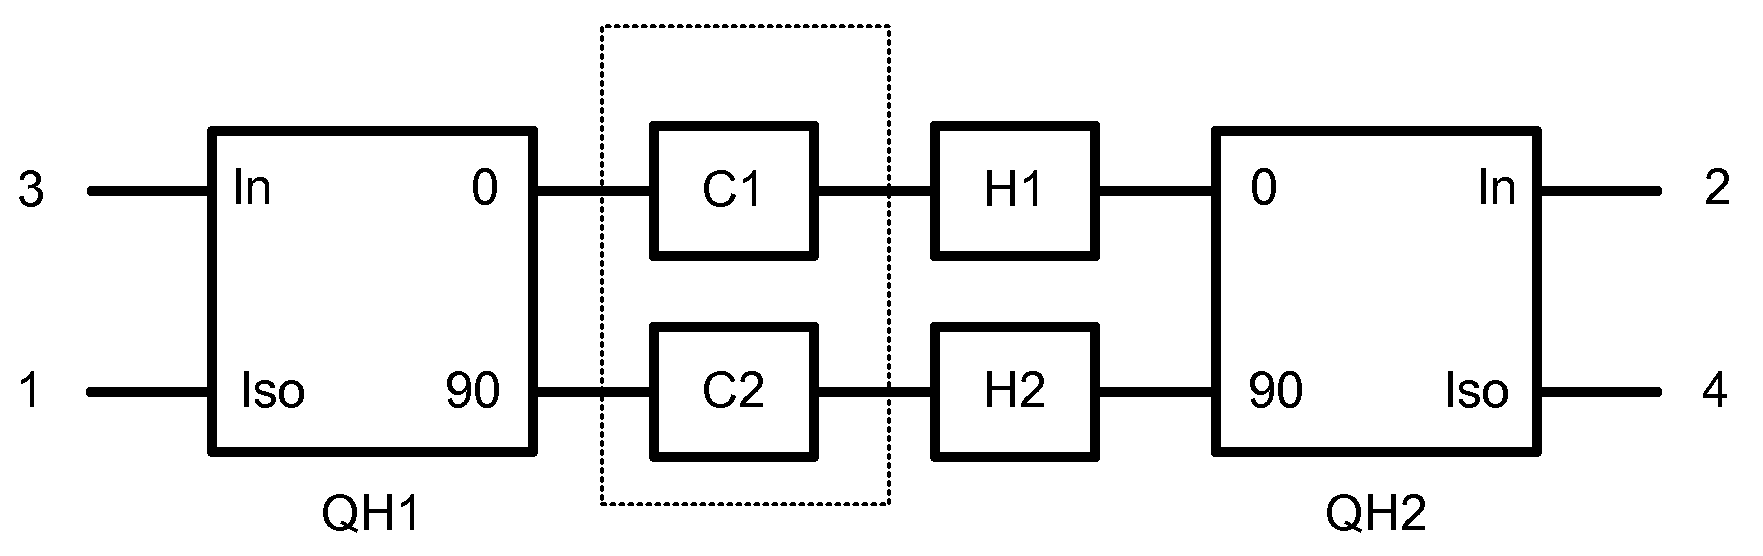 Enhancing isolation and impedance matching in hybrid-based cancellation networks and duplexers